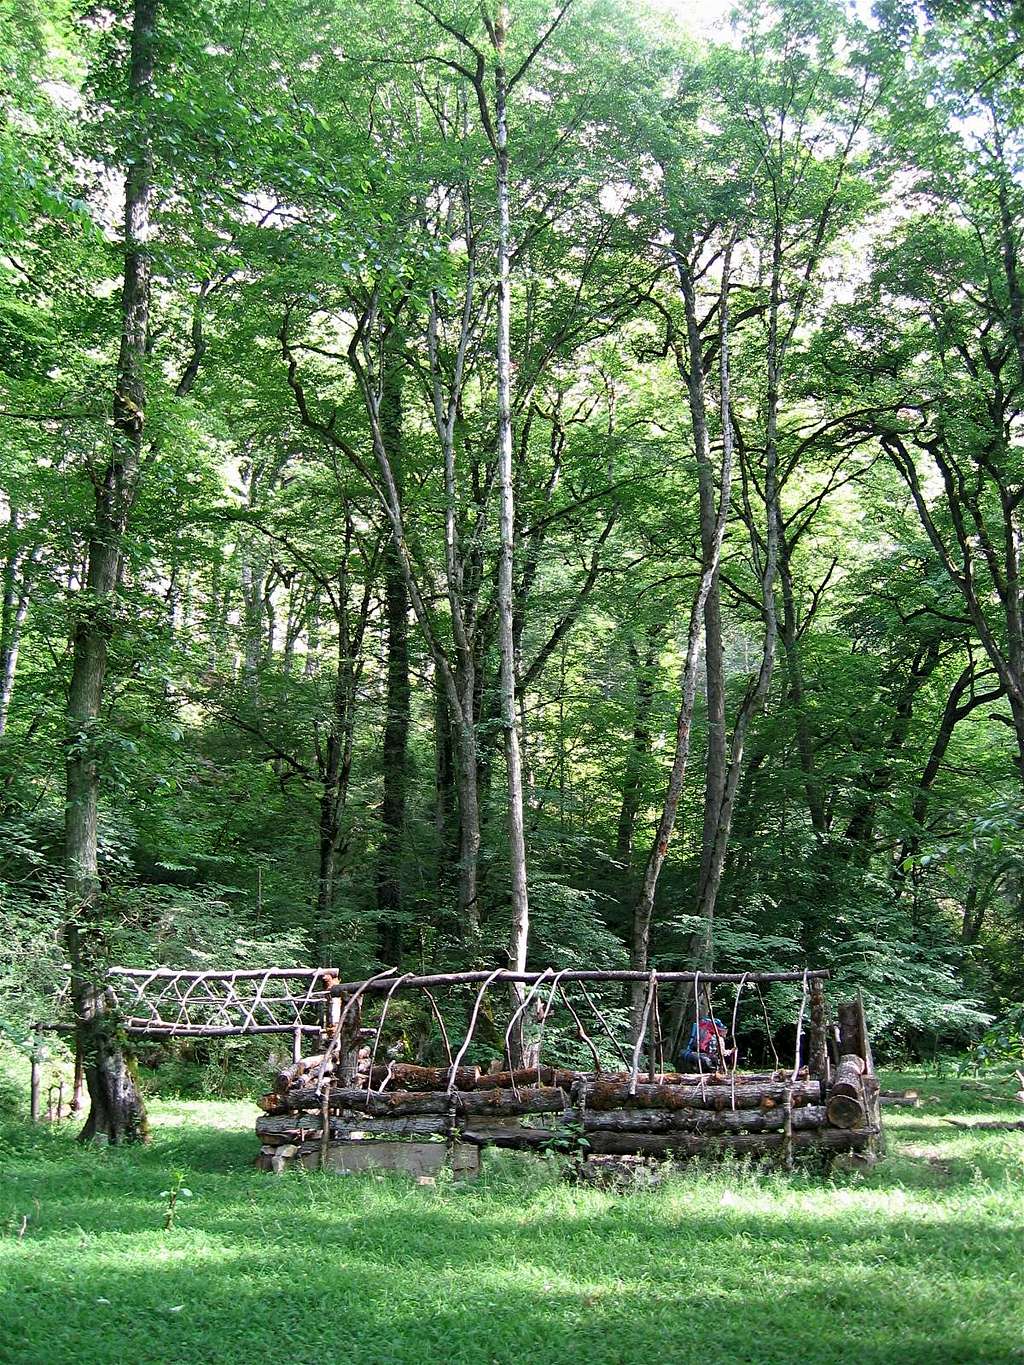 Structure in the Meadow